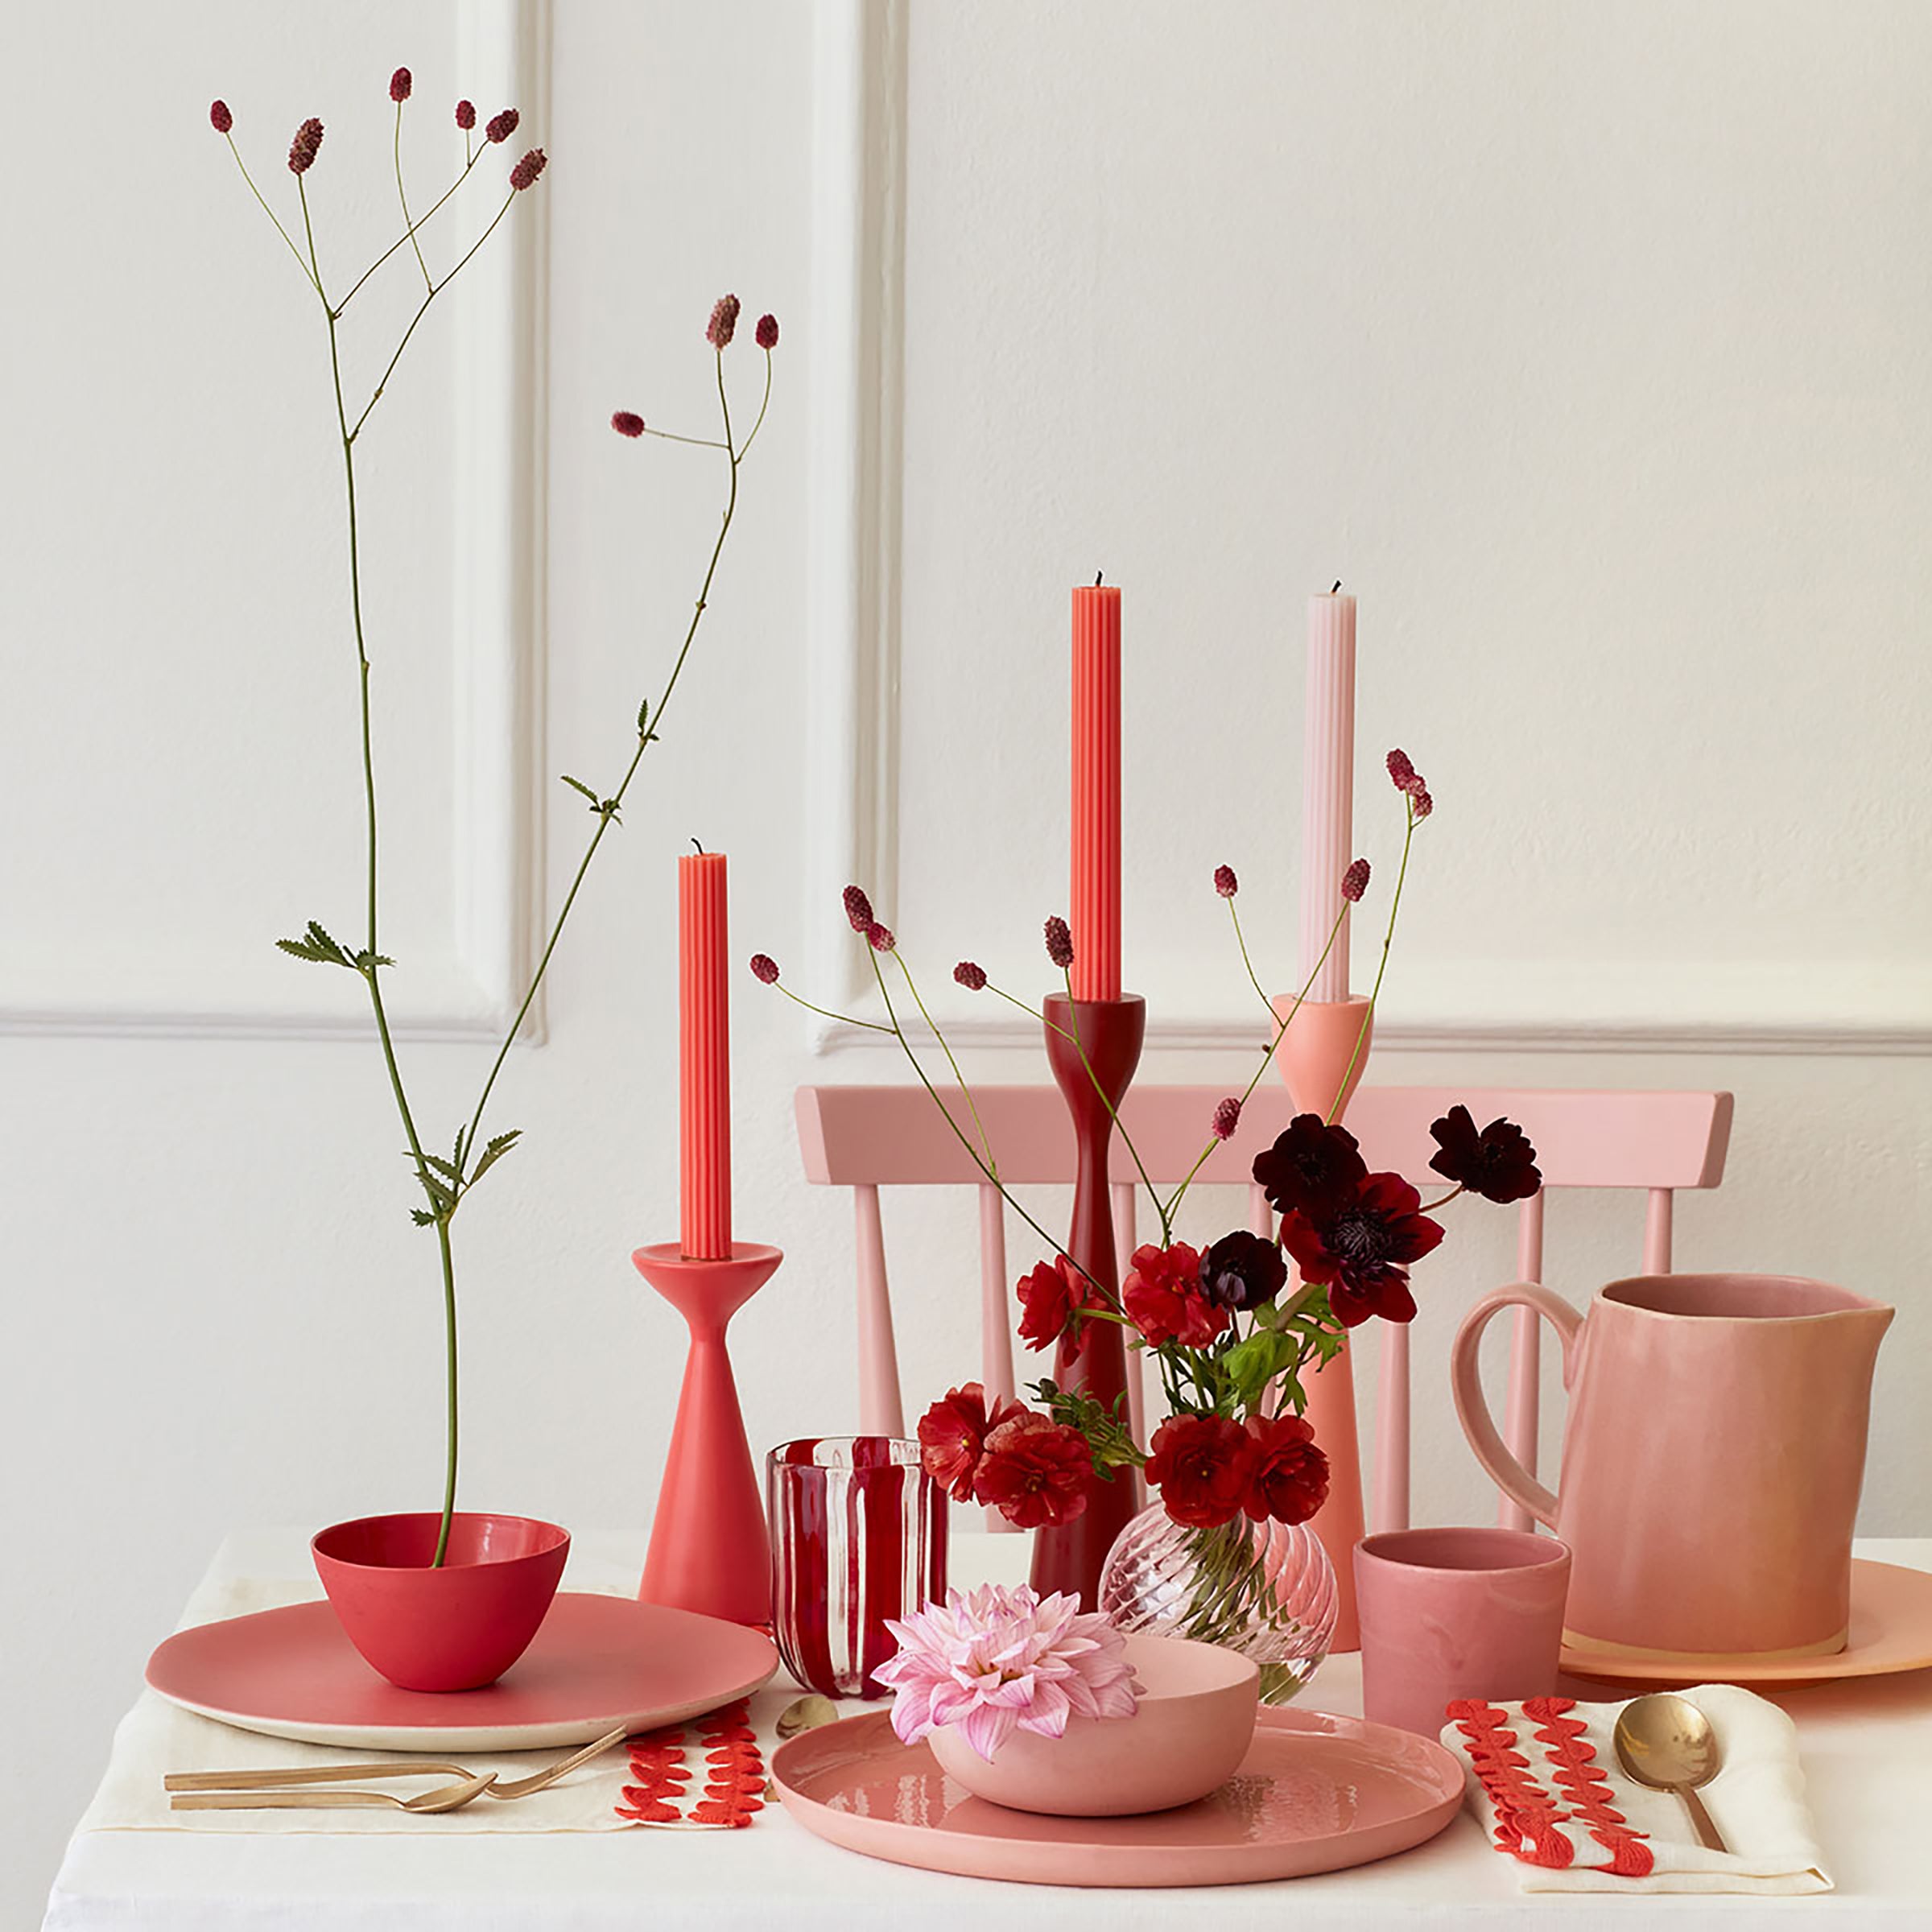 Our decorative candles in coral, pink, blue, sage and yellow will add colour to your party table.